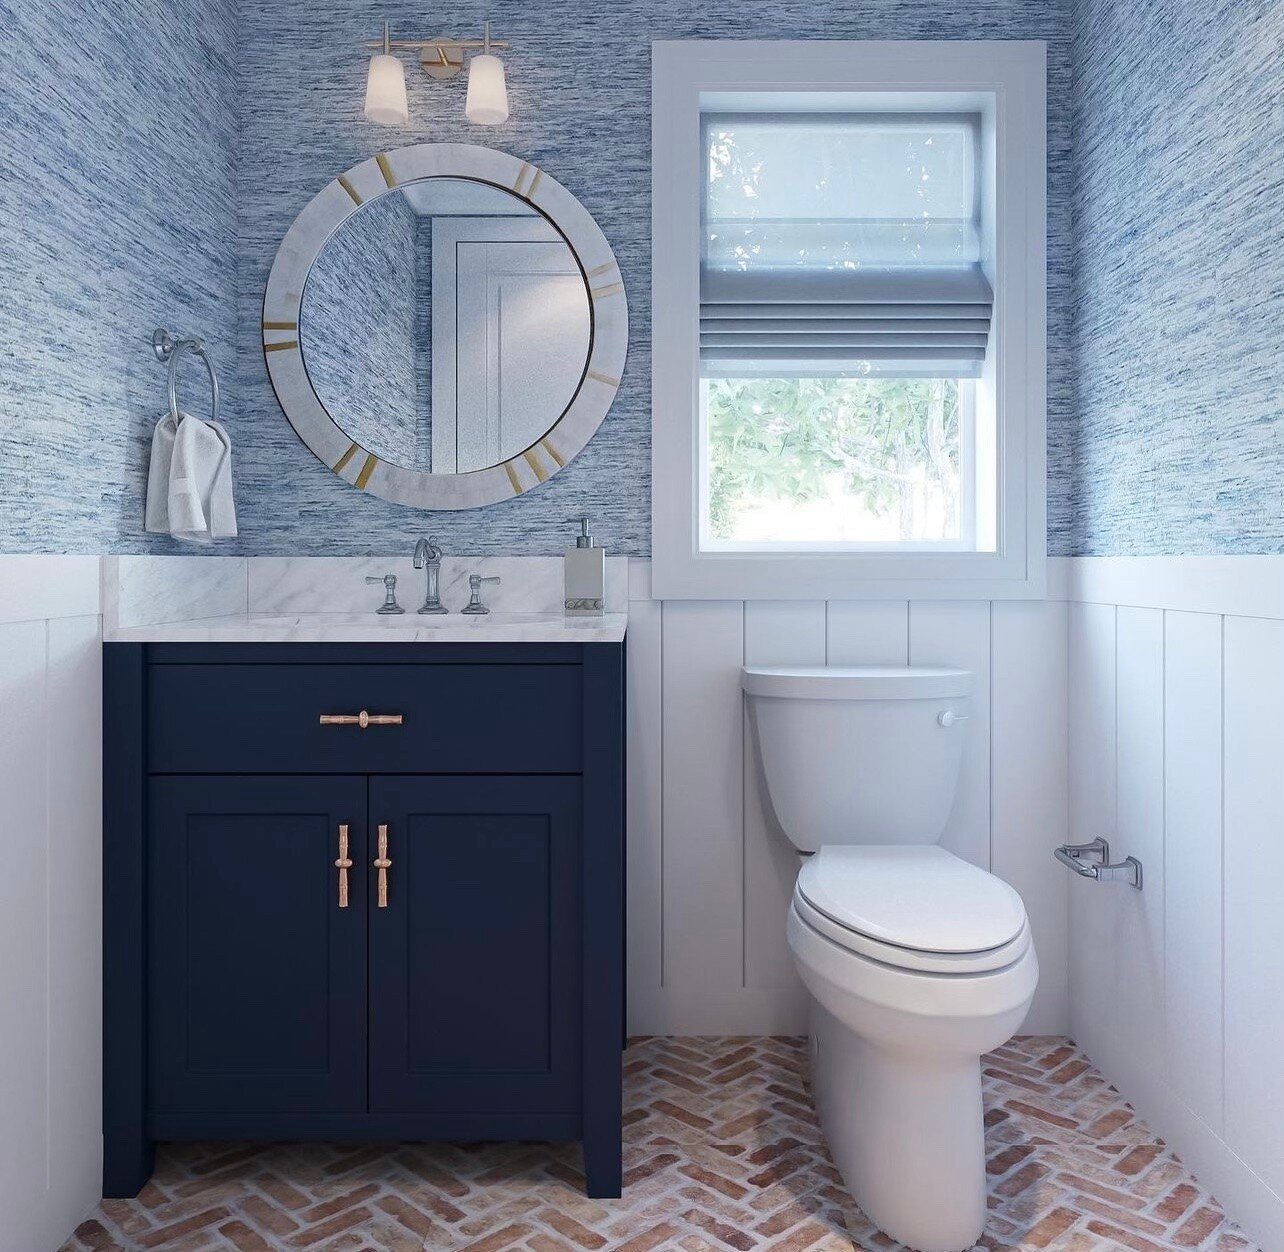 Another gorgeous rendering that was created for a valued client. The allure of this exquisite powder room is simply irresistible! 💙⁠
⁠
⁠
⁠
⁠
#interiordesign #designer #interiordesigner #ctbusiness #womenownedbusiness #makeithappen #designgoals #love